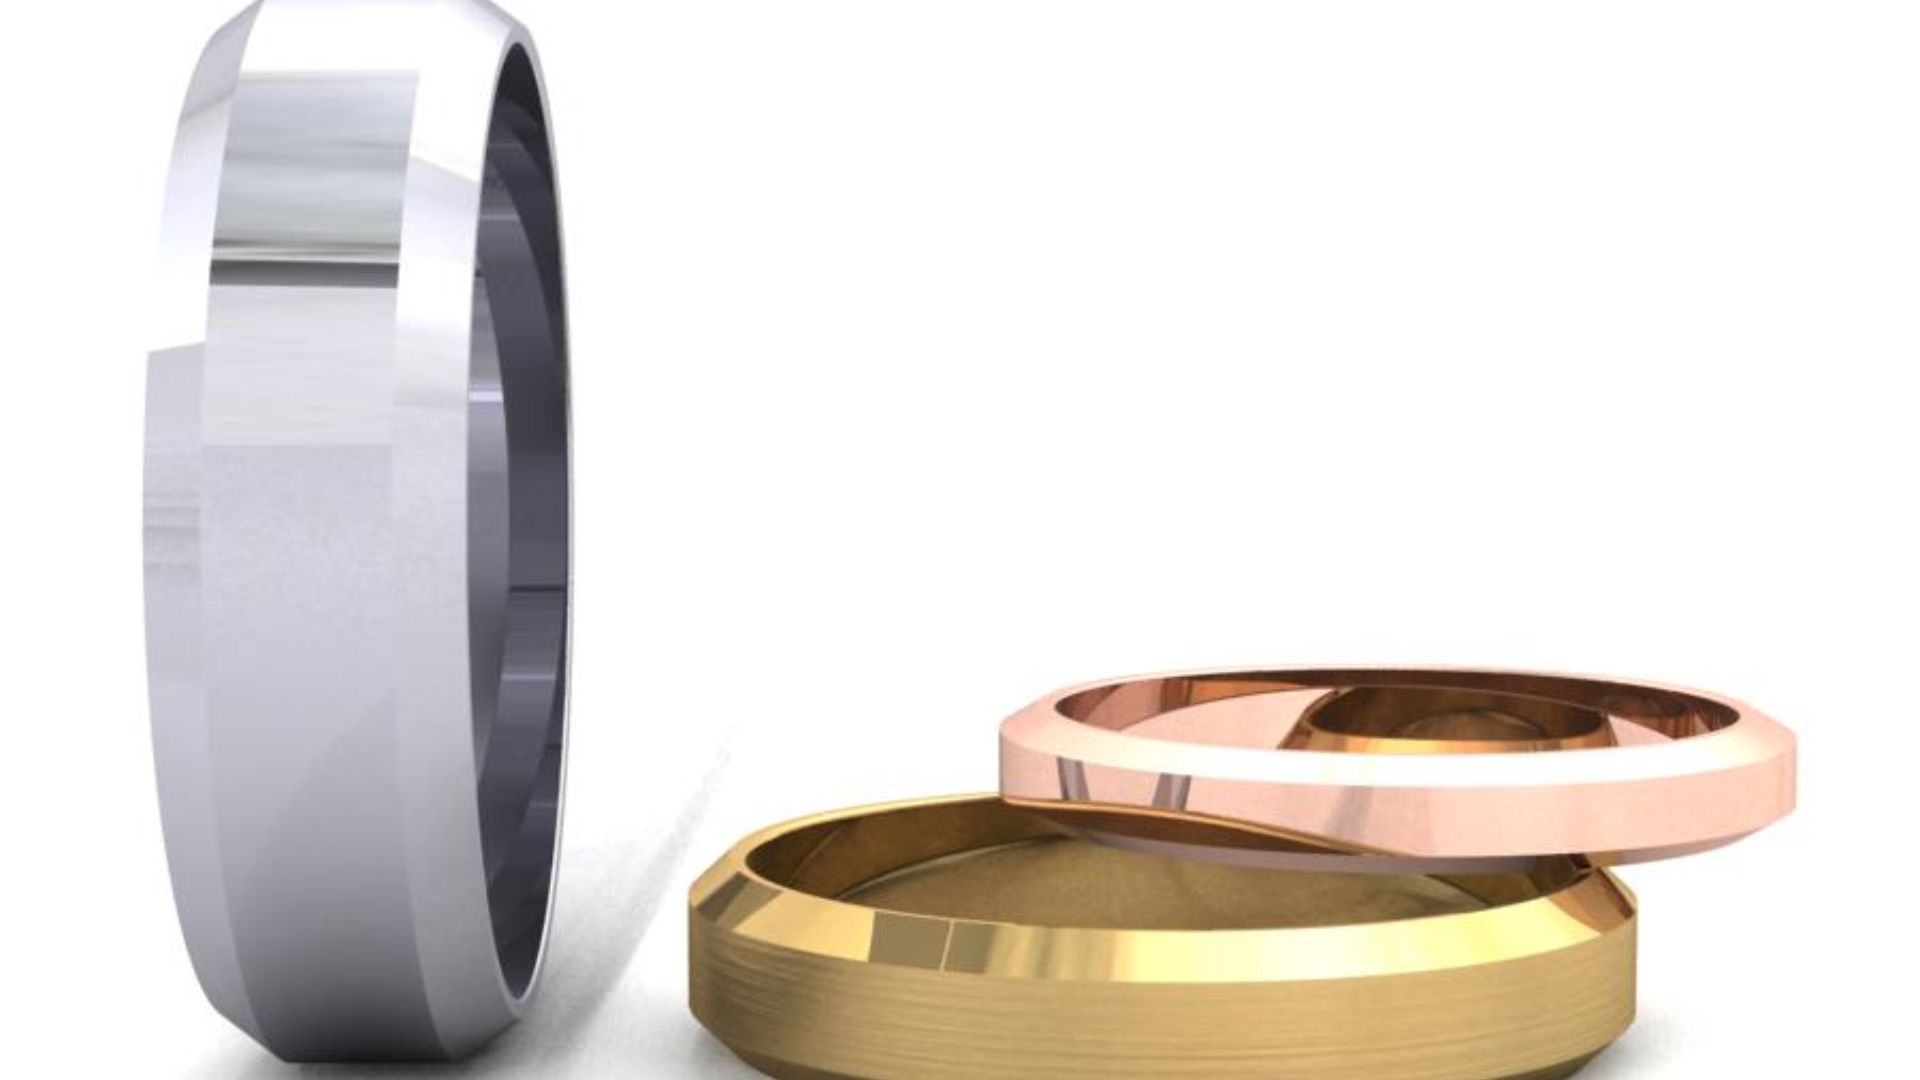 Sophistication In Simplicity - Beveled Edge Wedding Bands Unveiled